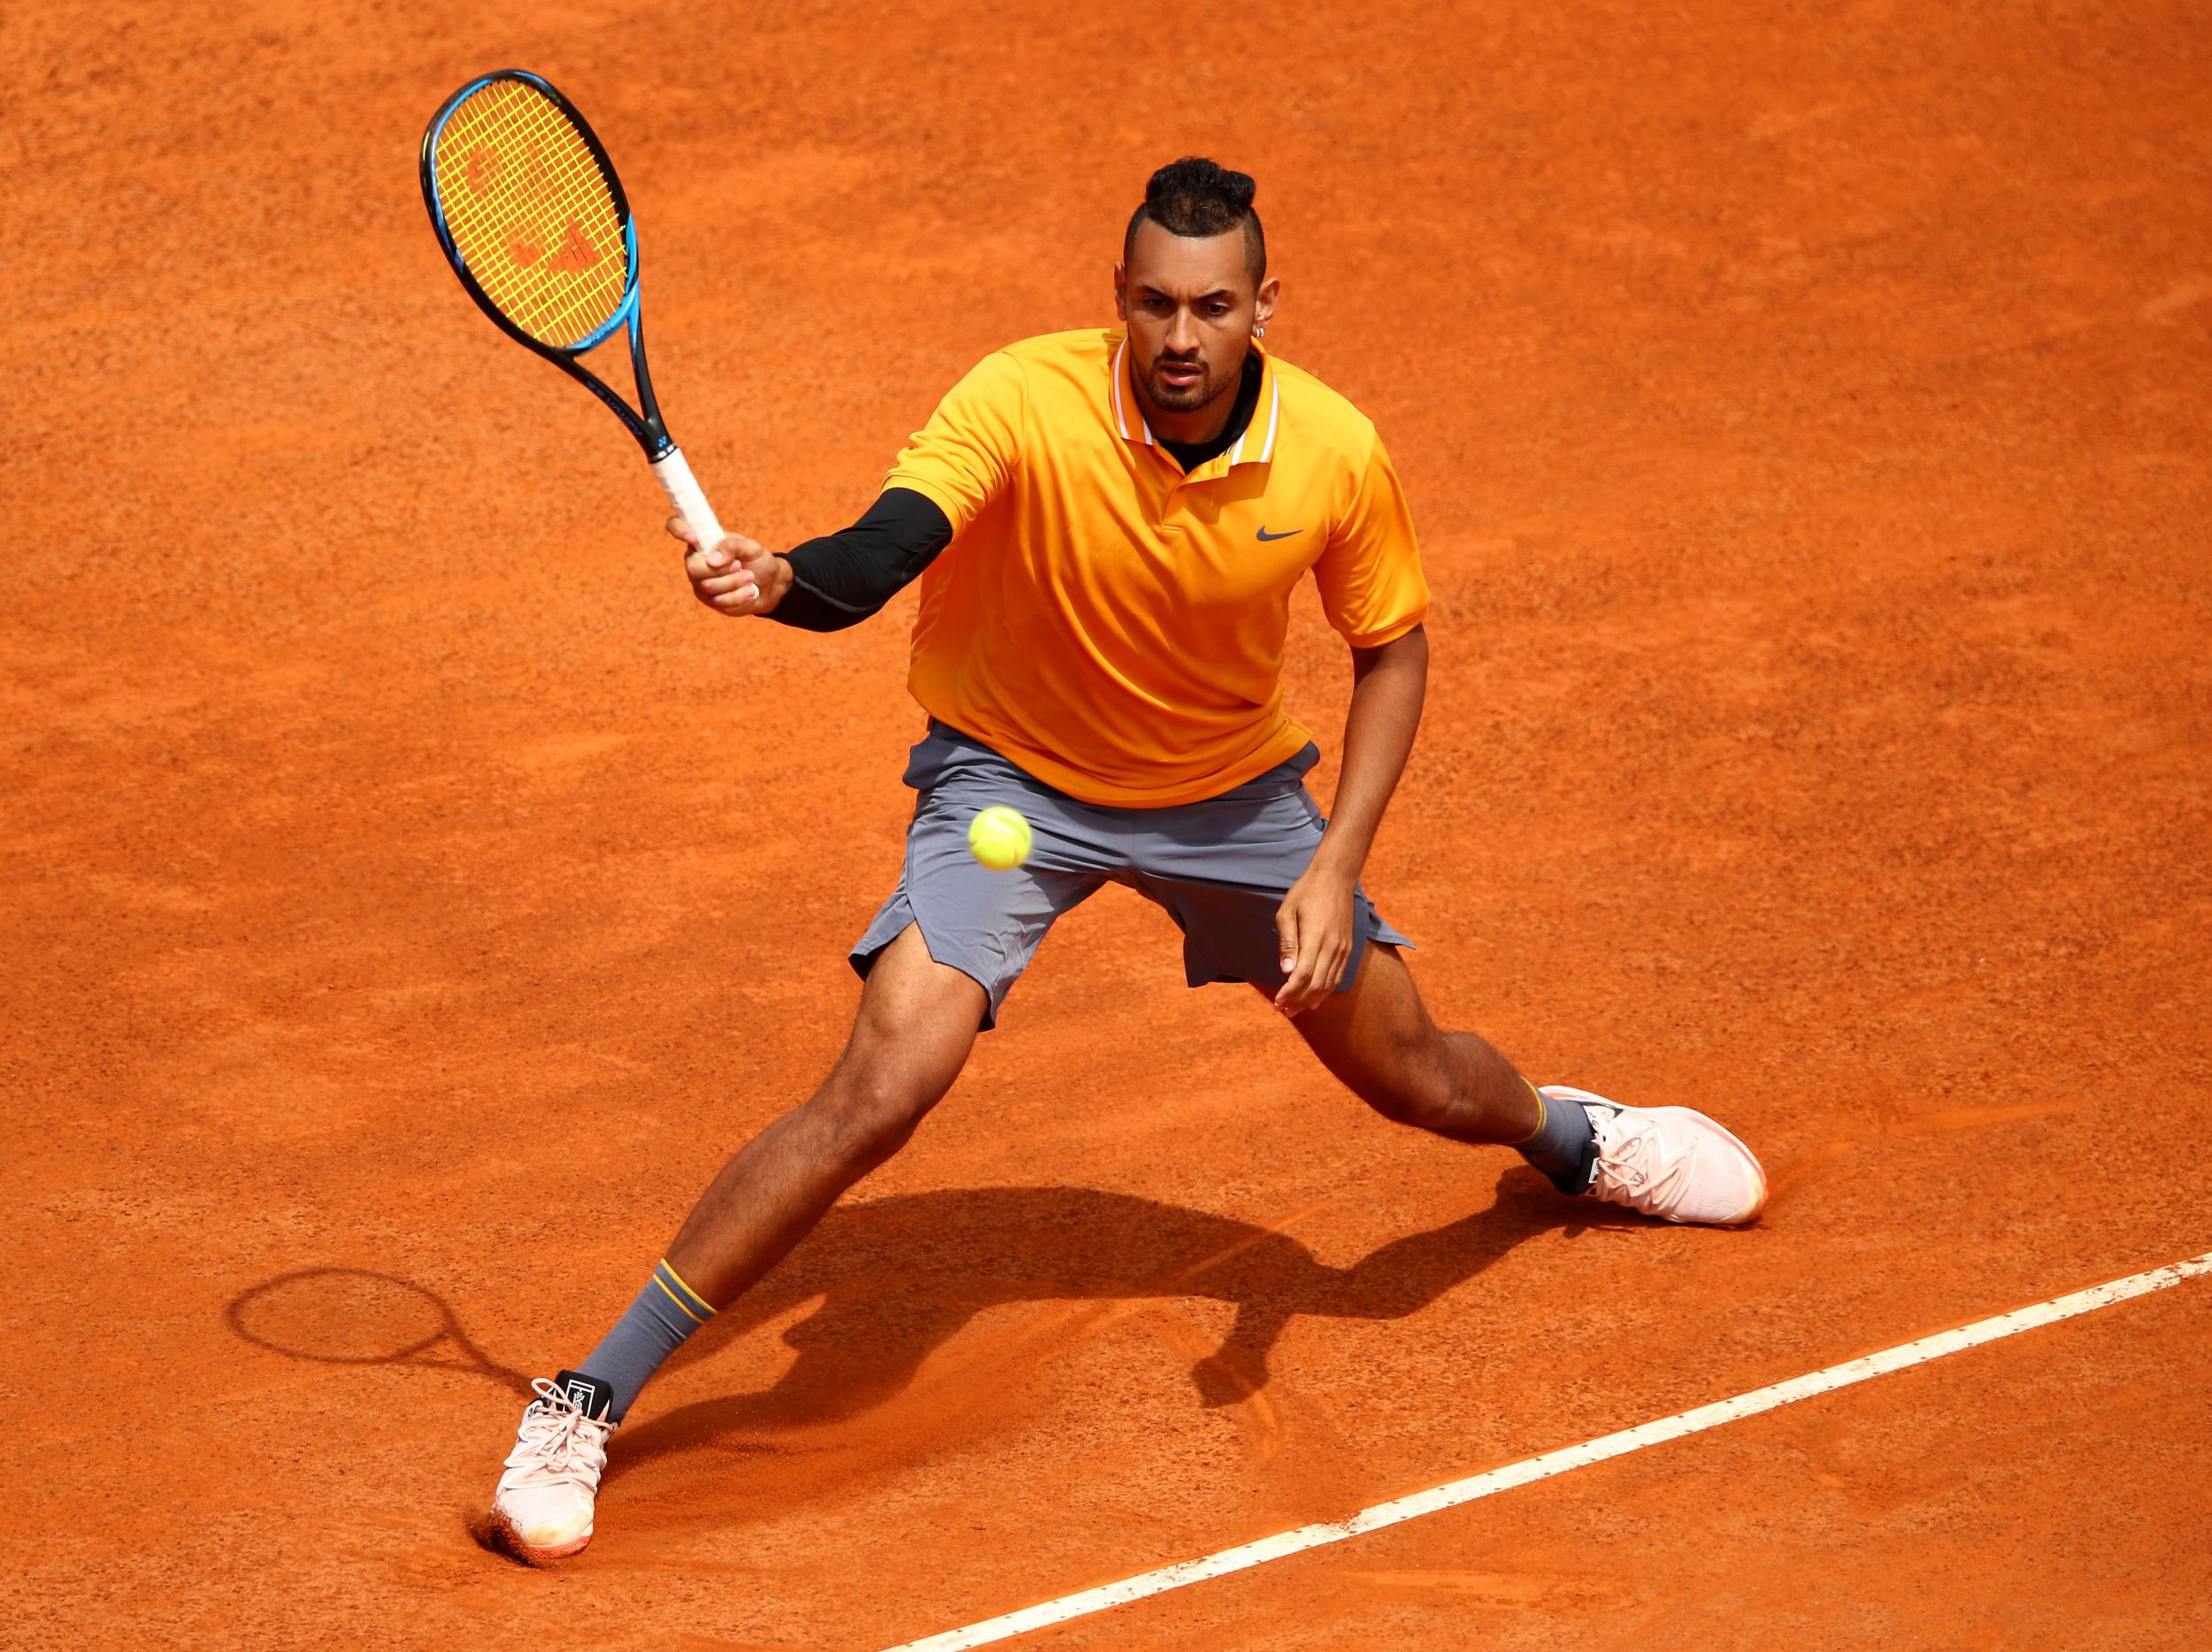 French Open 2019 Nick Kyrgios withdraws from RolandGarros due to